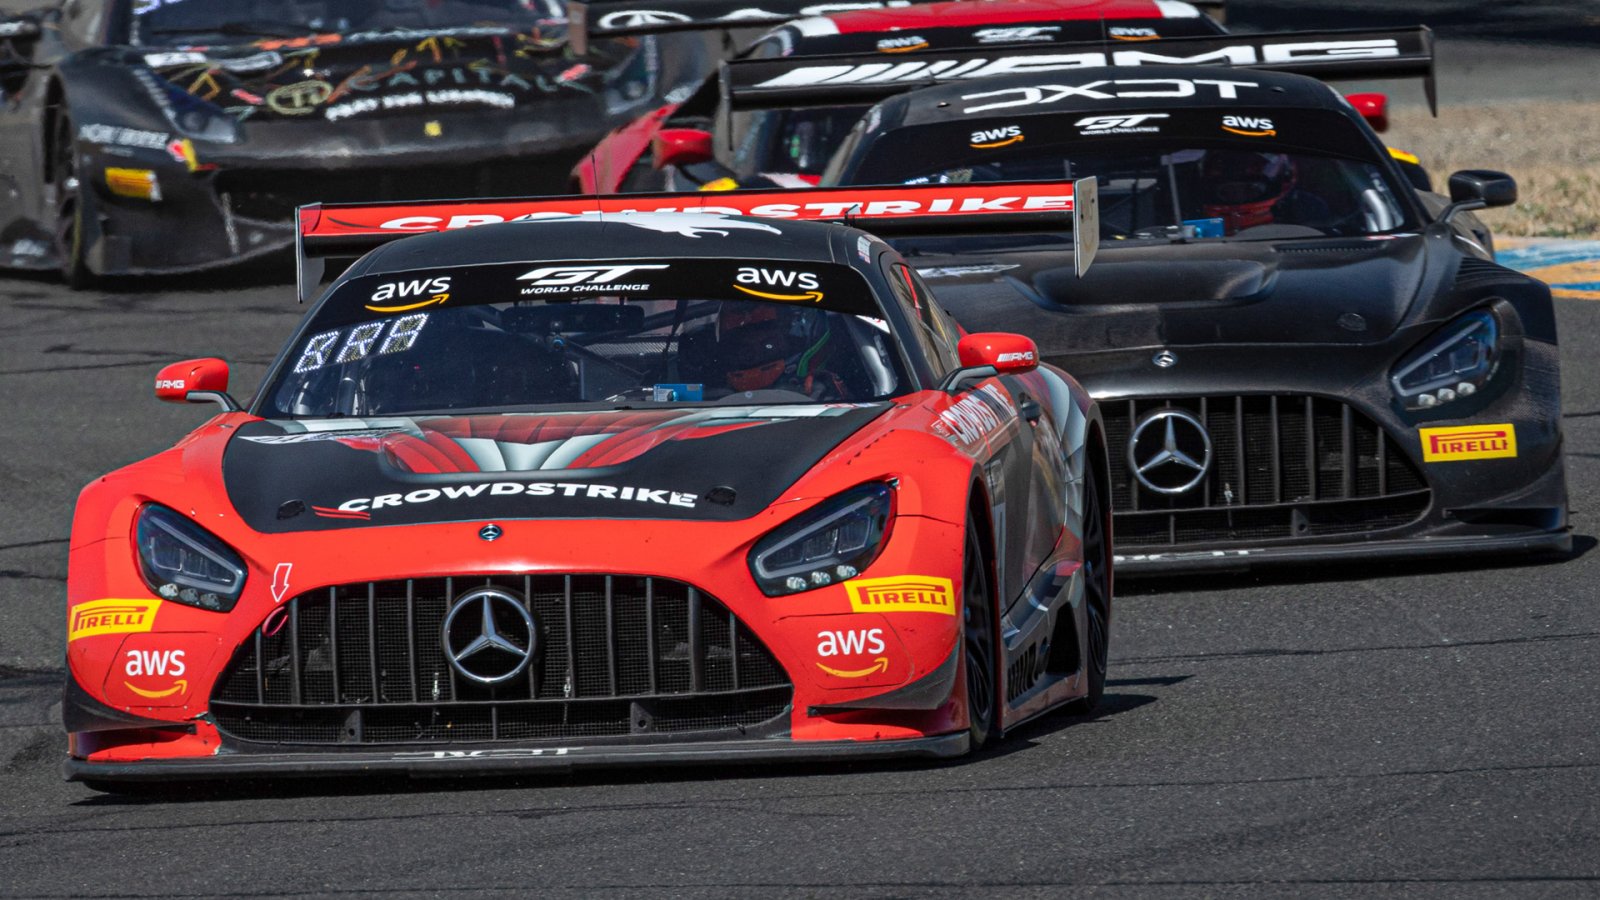 Mercedes-AMG GT3 Teams Pull Double Duty at Indianapolis Motor Speedway in Intercontinental GT Challenge 8 Hour and GT World Challenge America Season Finale